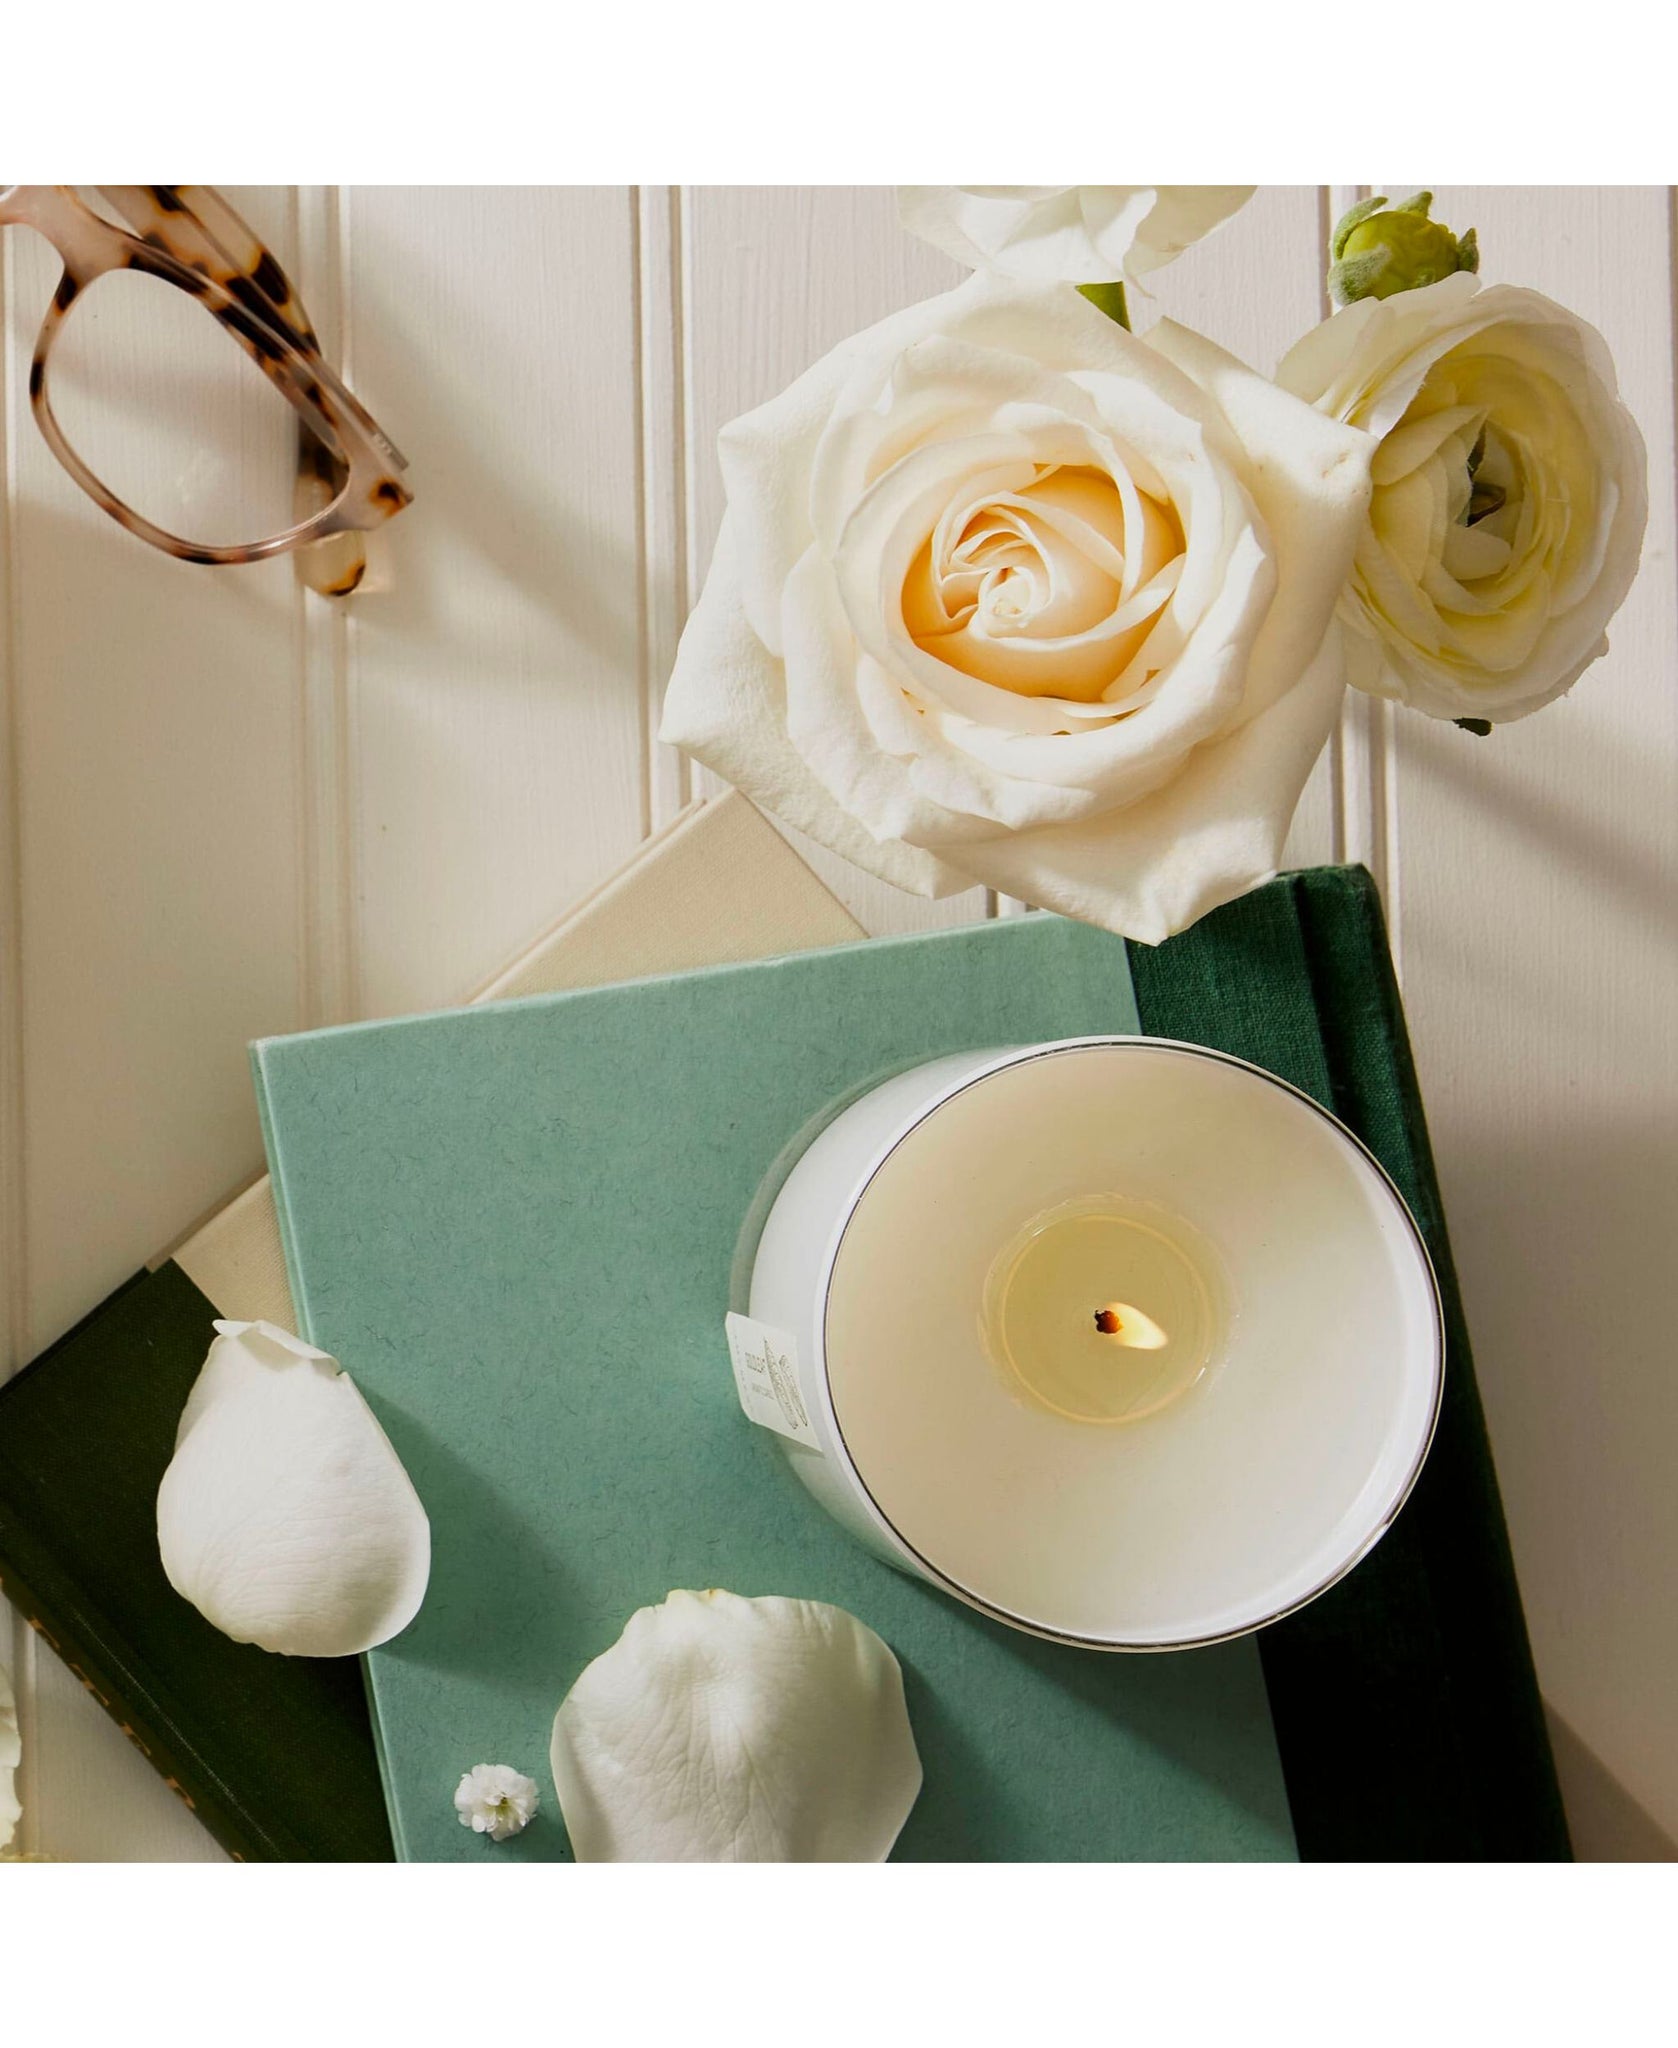 Thymes Goldleaf Candle